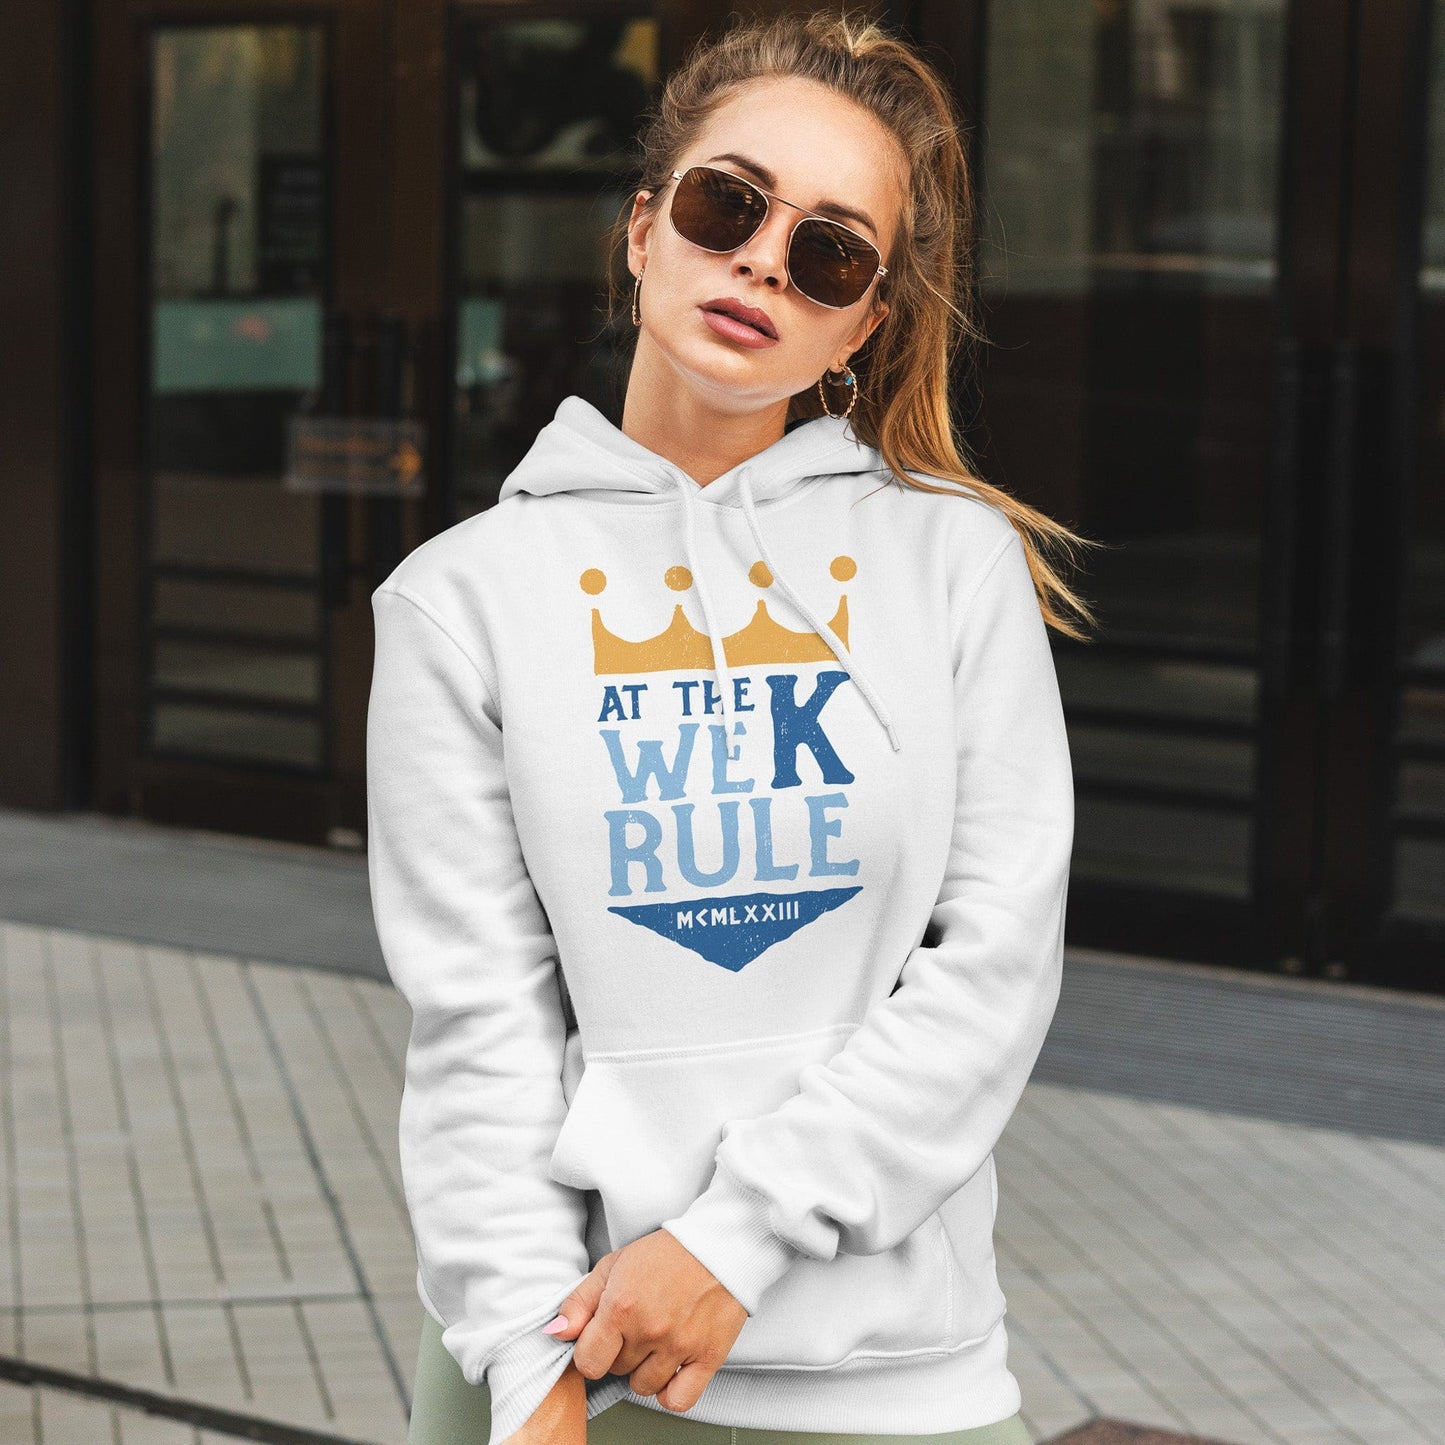 KC Swag | Kansas City Royals blue/gold AT THE K WE RULE on white sponge-fleece pullover hoodie worn by female model standing outside of shopping mall entrance